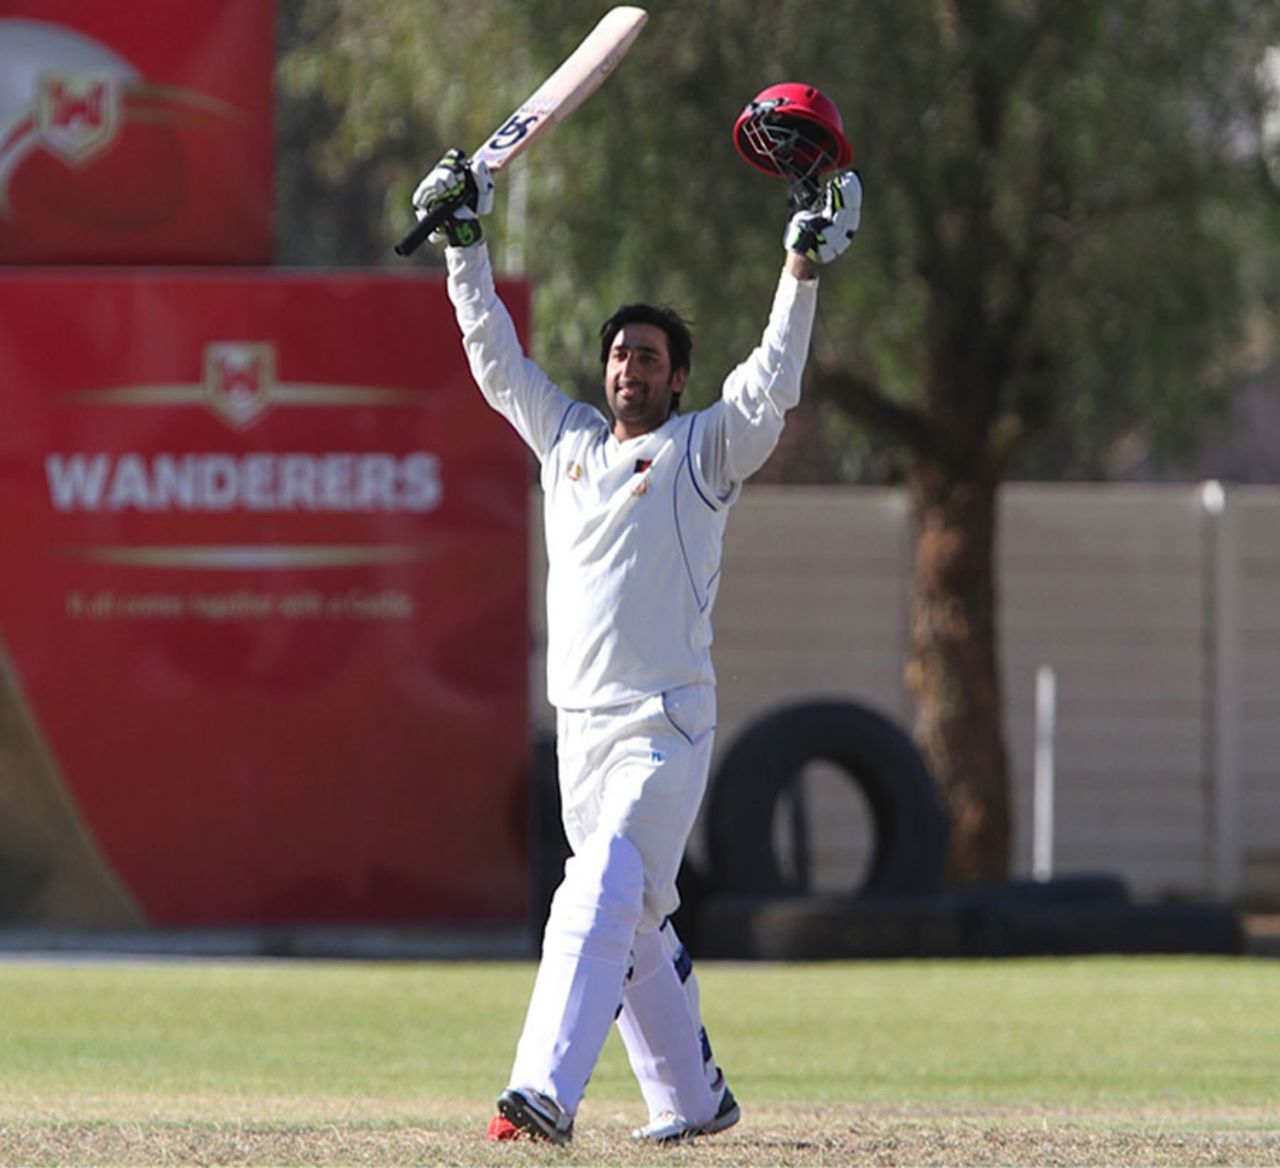 Asghar Stanikzai raises his bat after reaching his century, Namibia v Afghanistan, ICC Intercontinental Cup, 2nd day, Windhoek, August 5, 2013